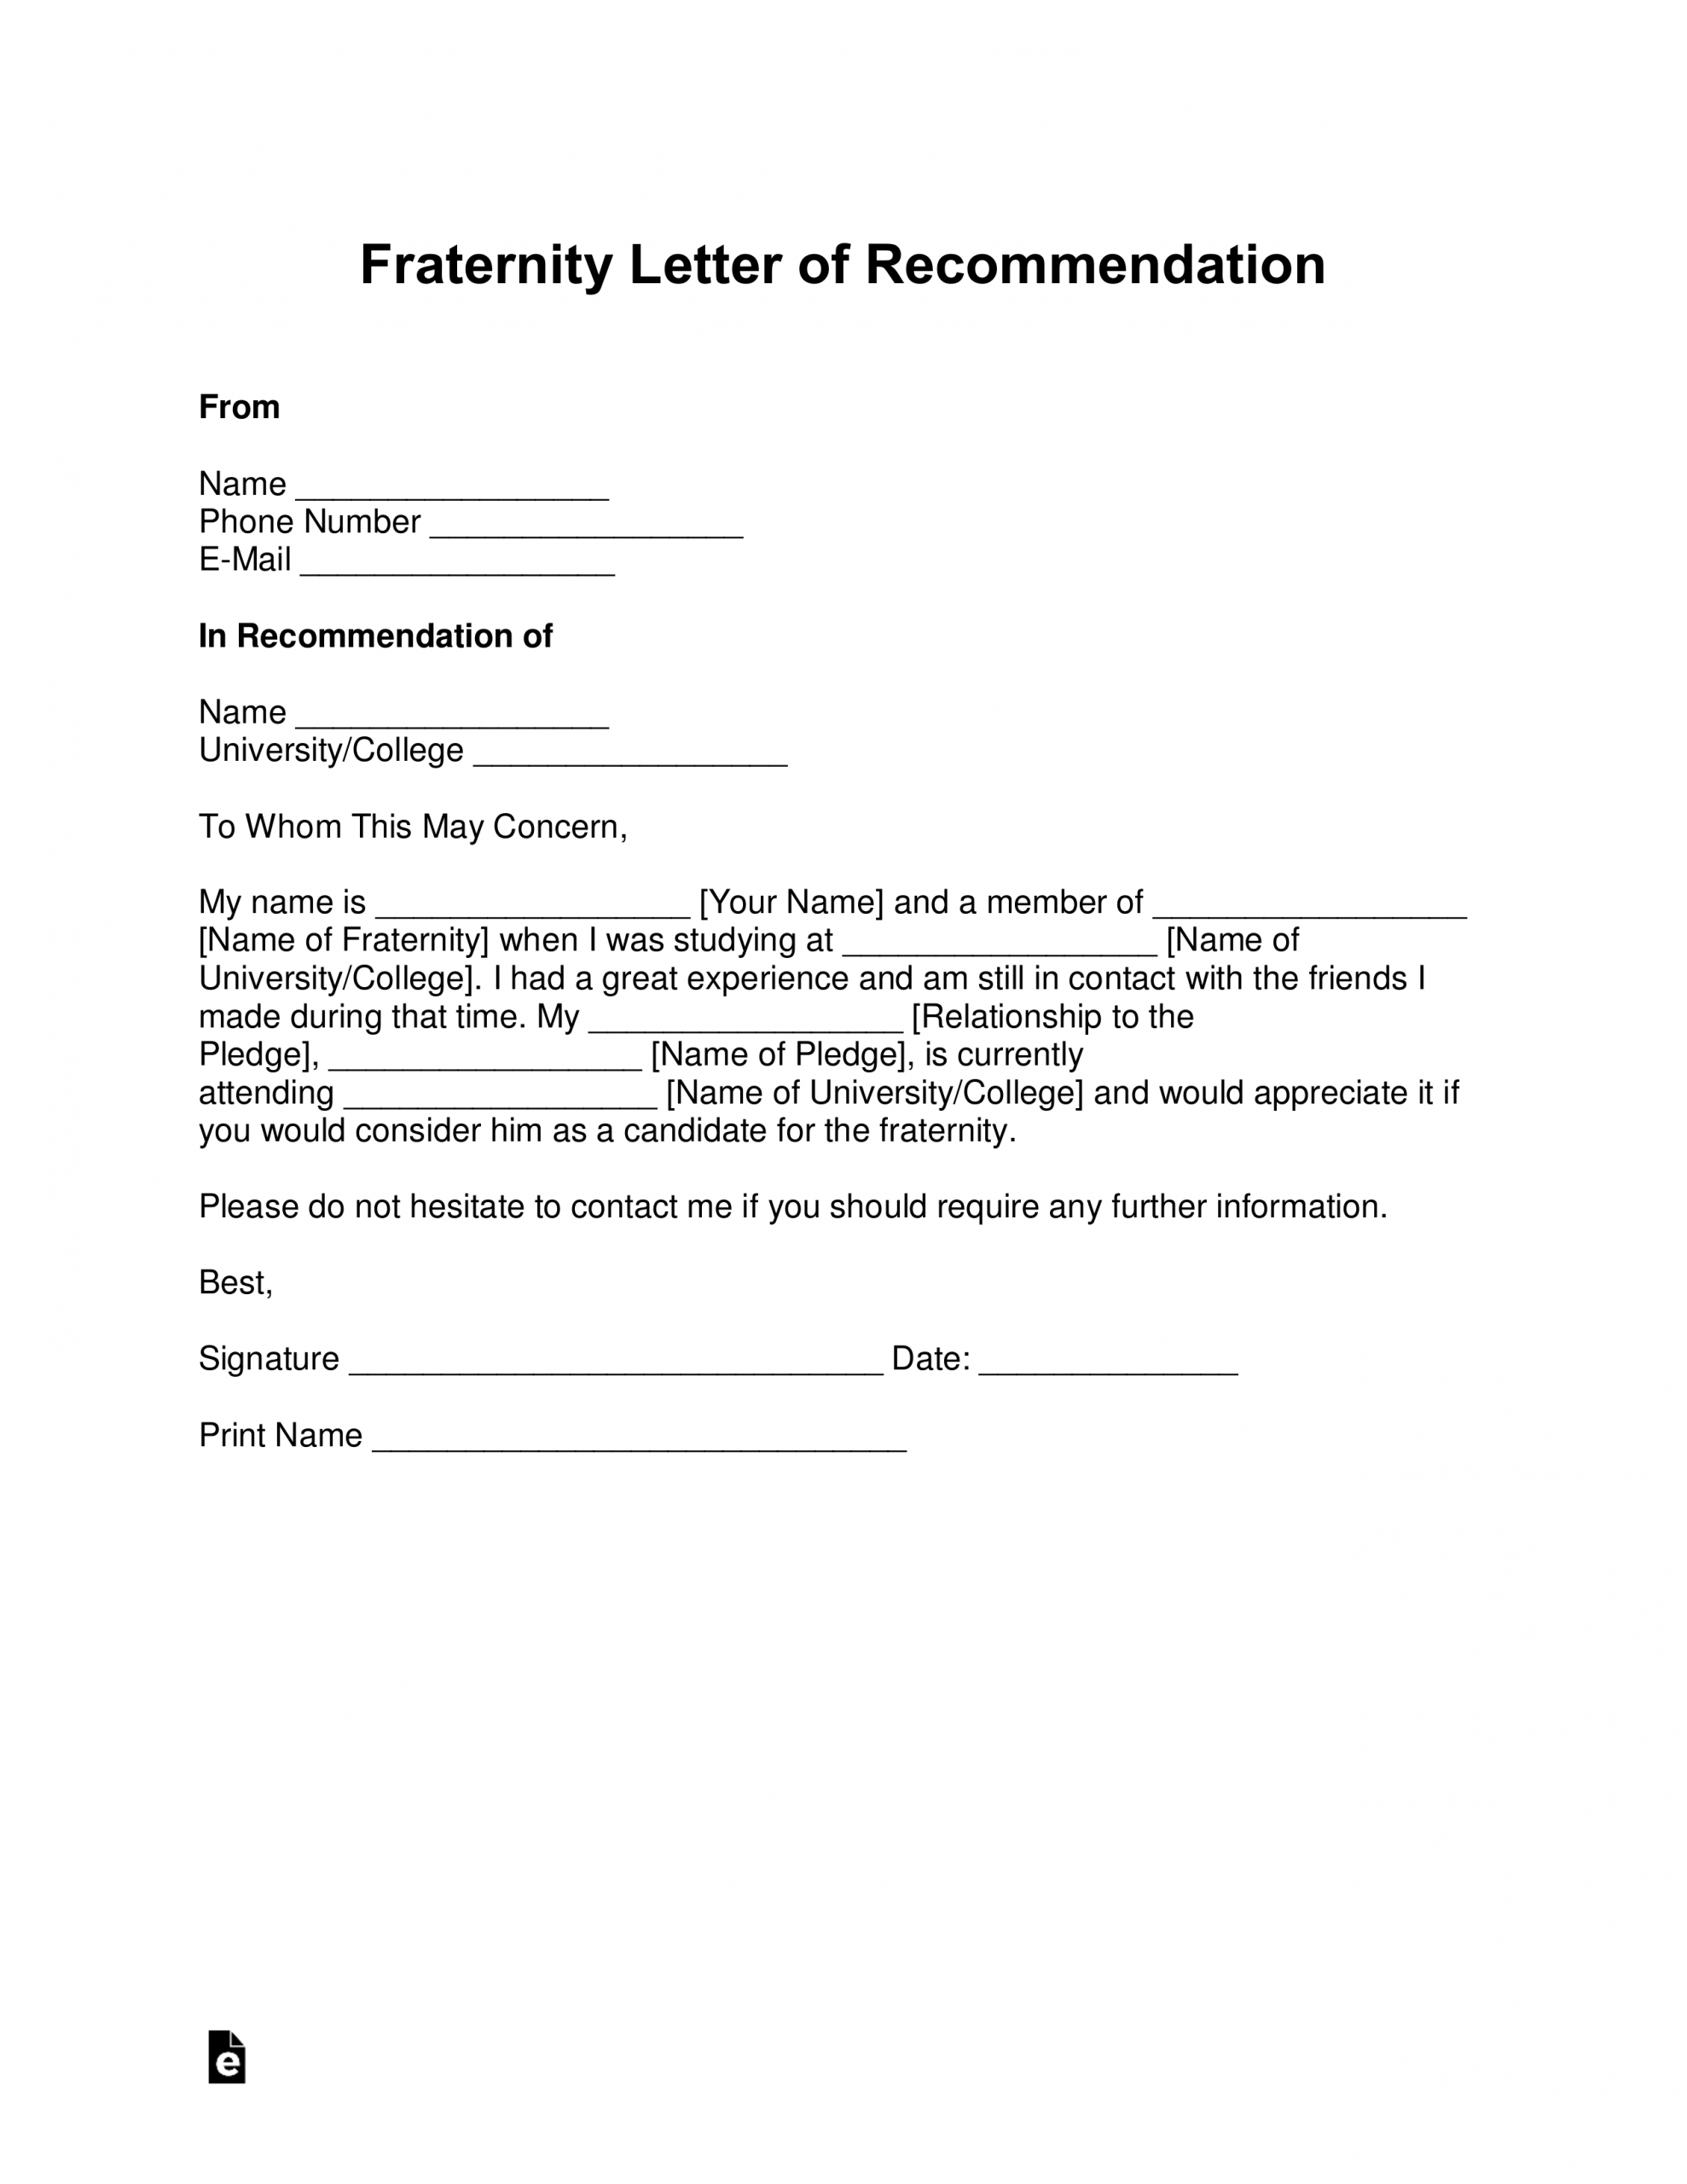 Free Fraternity Letter Of Recommendation Template With with dimensions 2550 X 3301